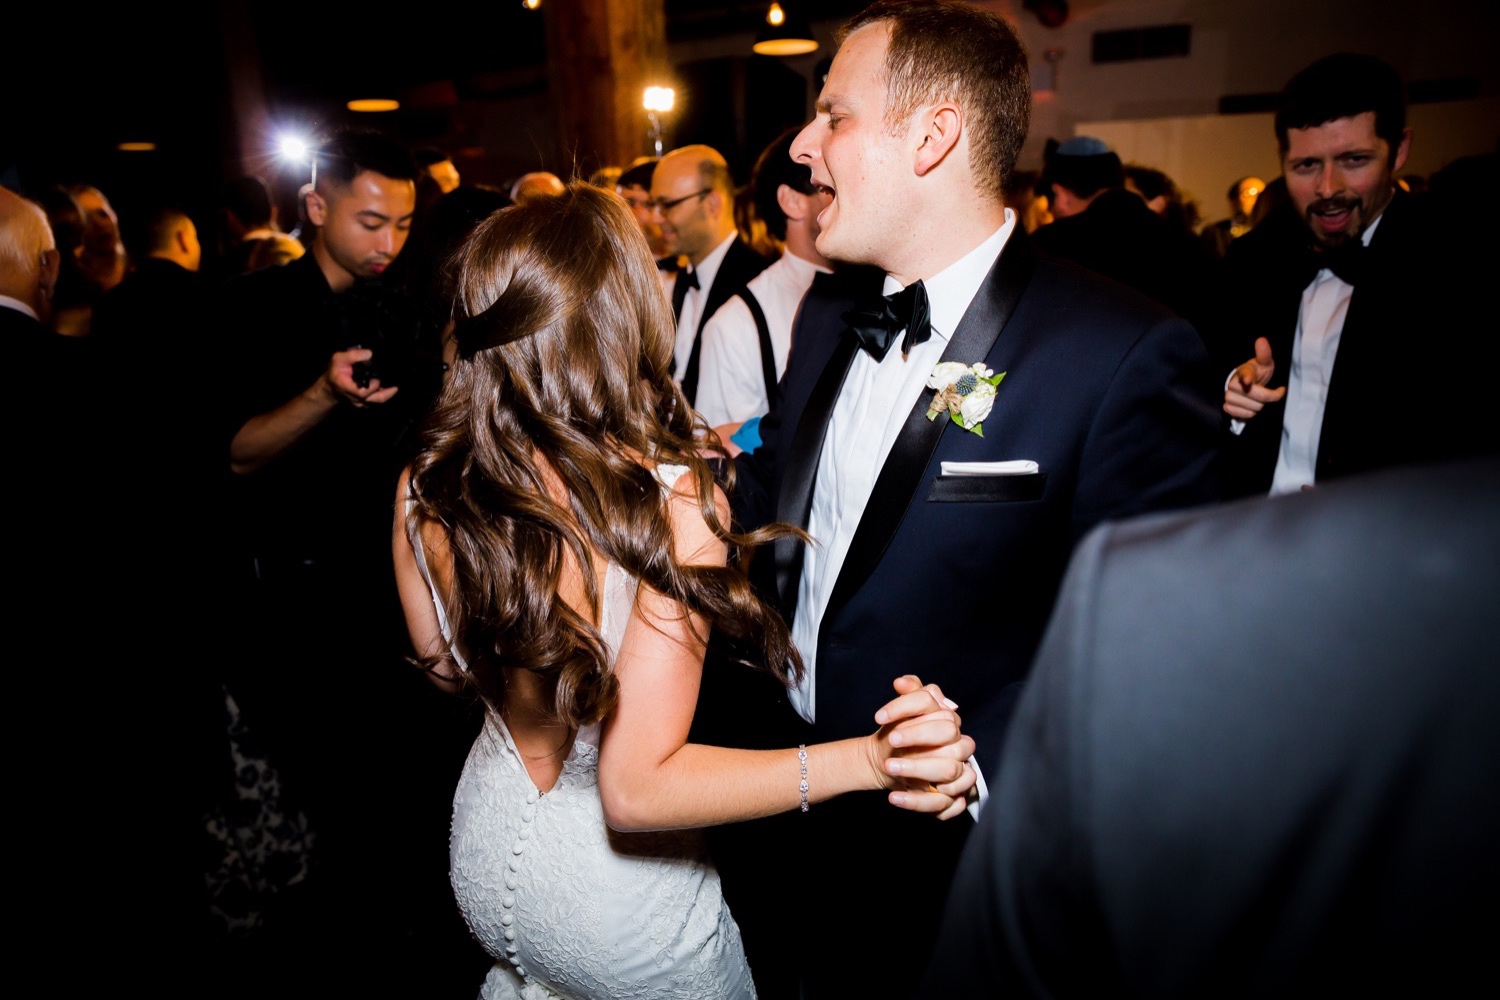 A newly wedded couple dancing together during a wedding reception at Liberty Warehouse, Brooklyn New York. 